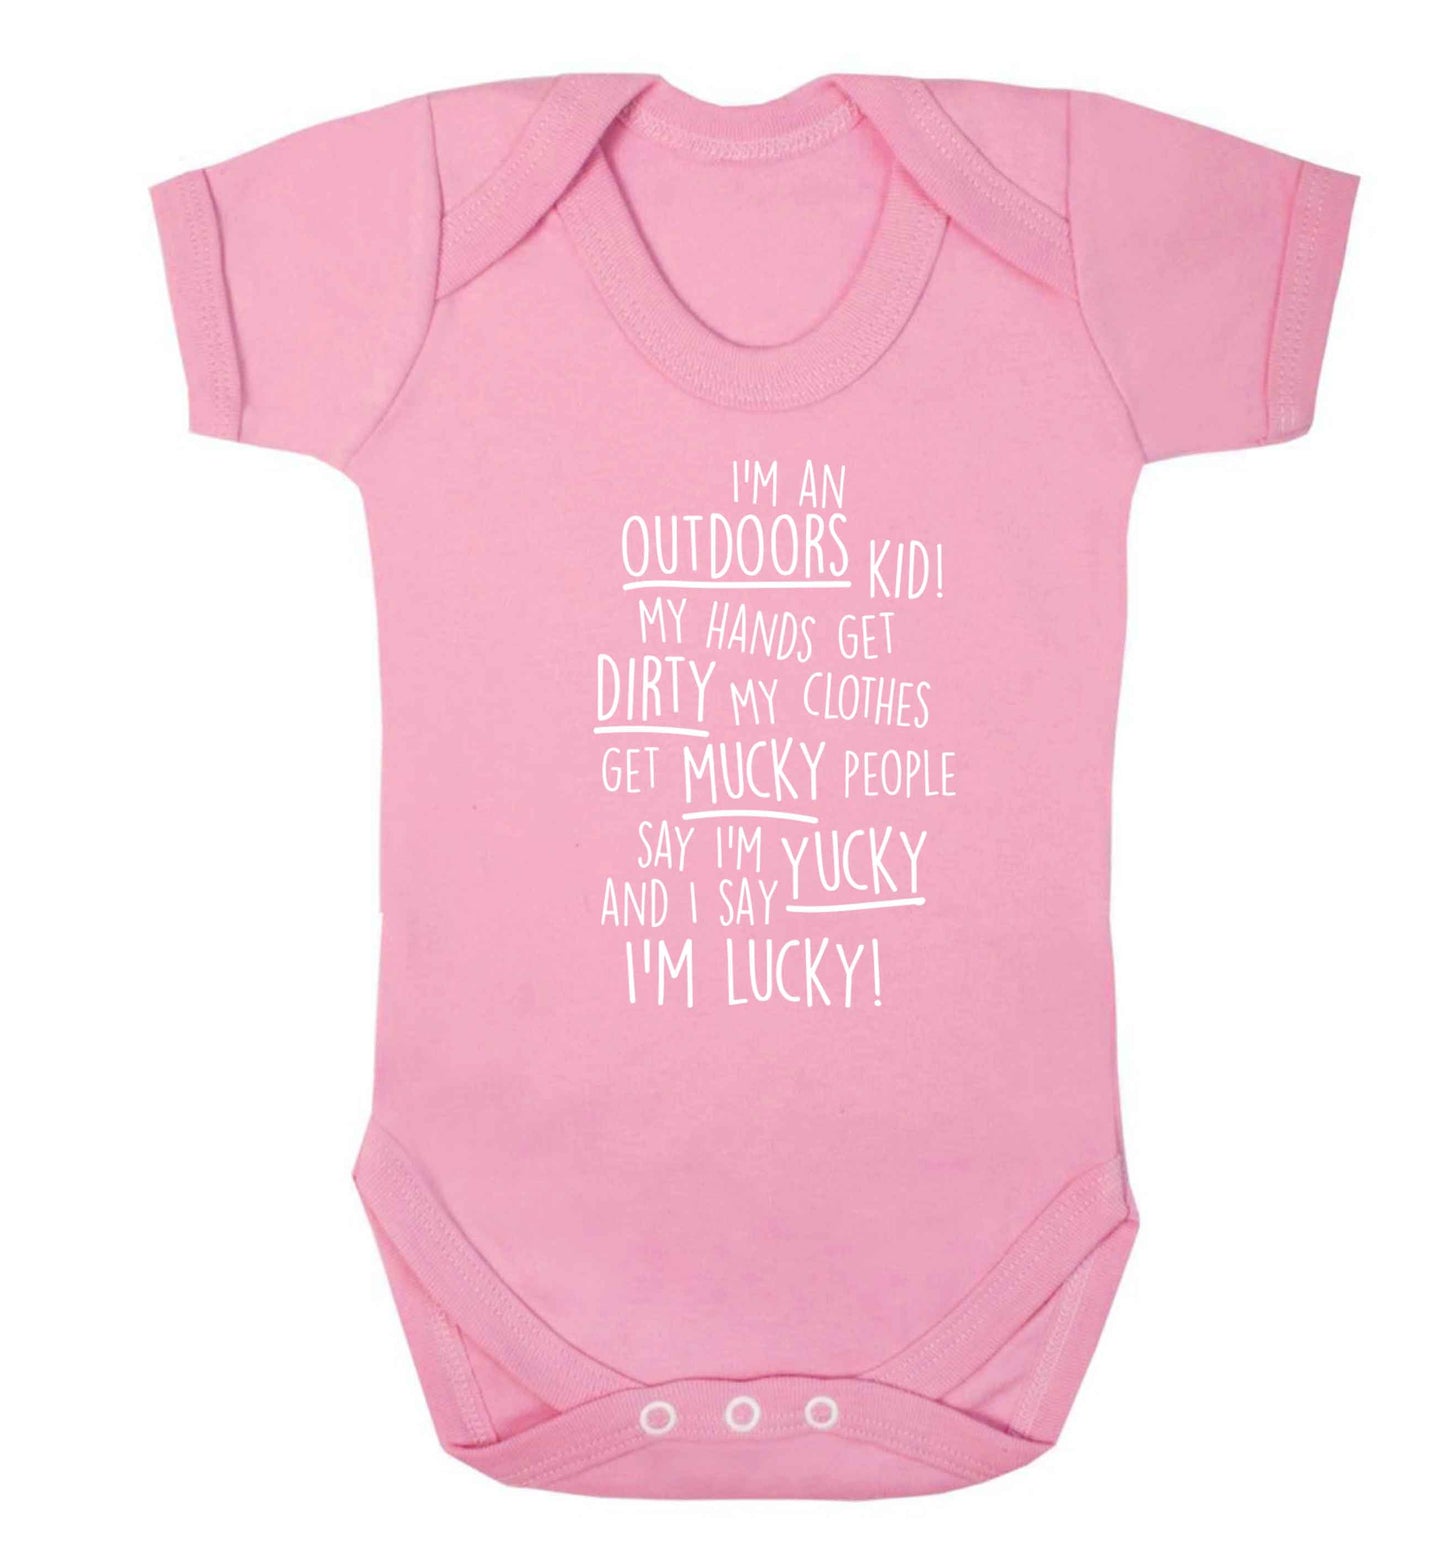 I'm an outdoors kid poem Baby Vest pale pink 18-24 months